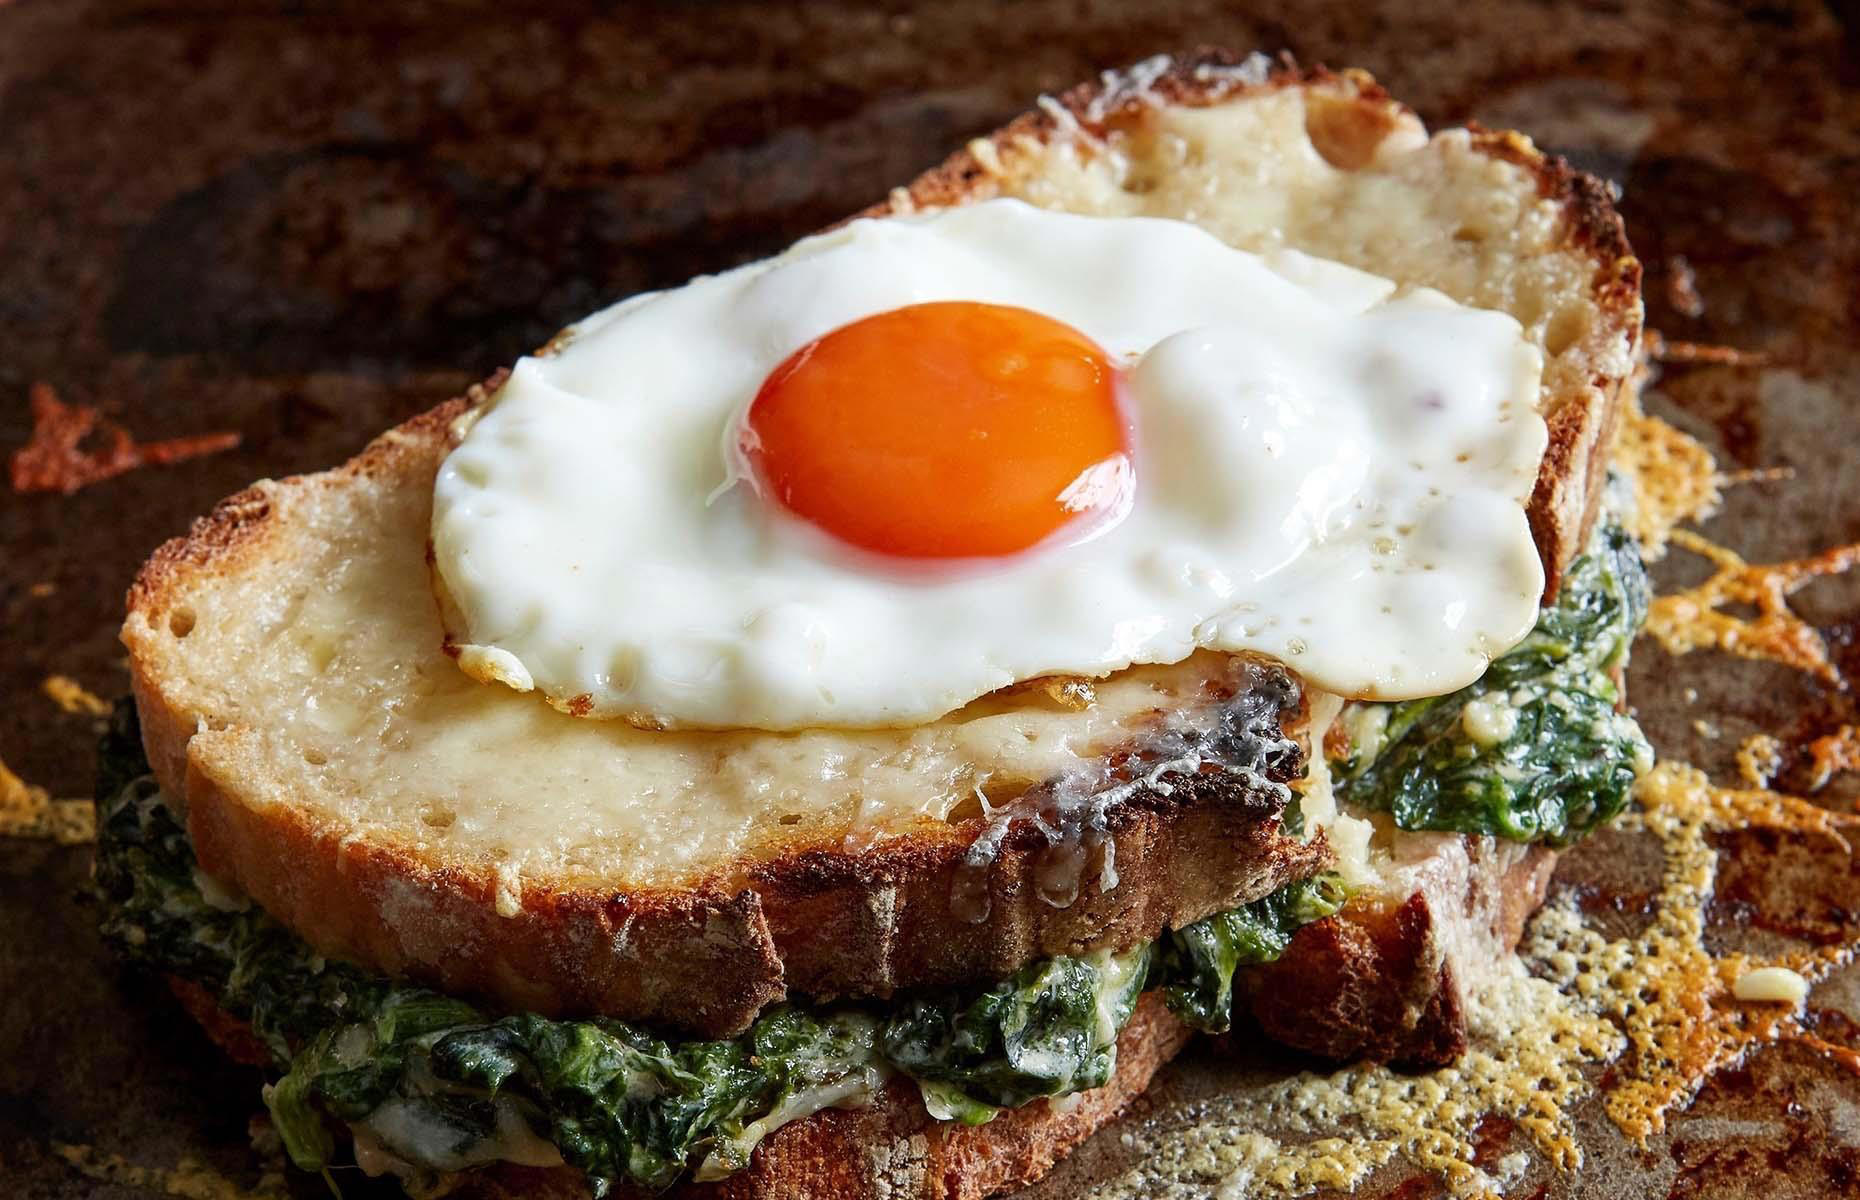 24 brilliant breakfast recipes that will make your mornings SO much better